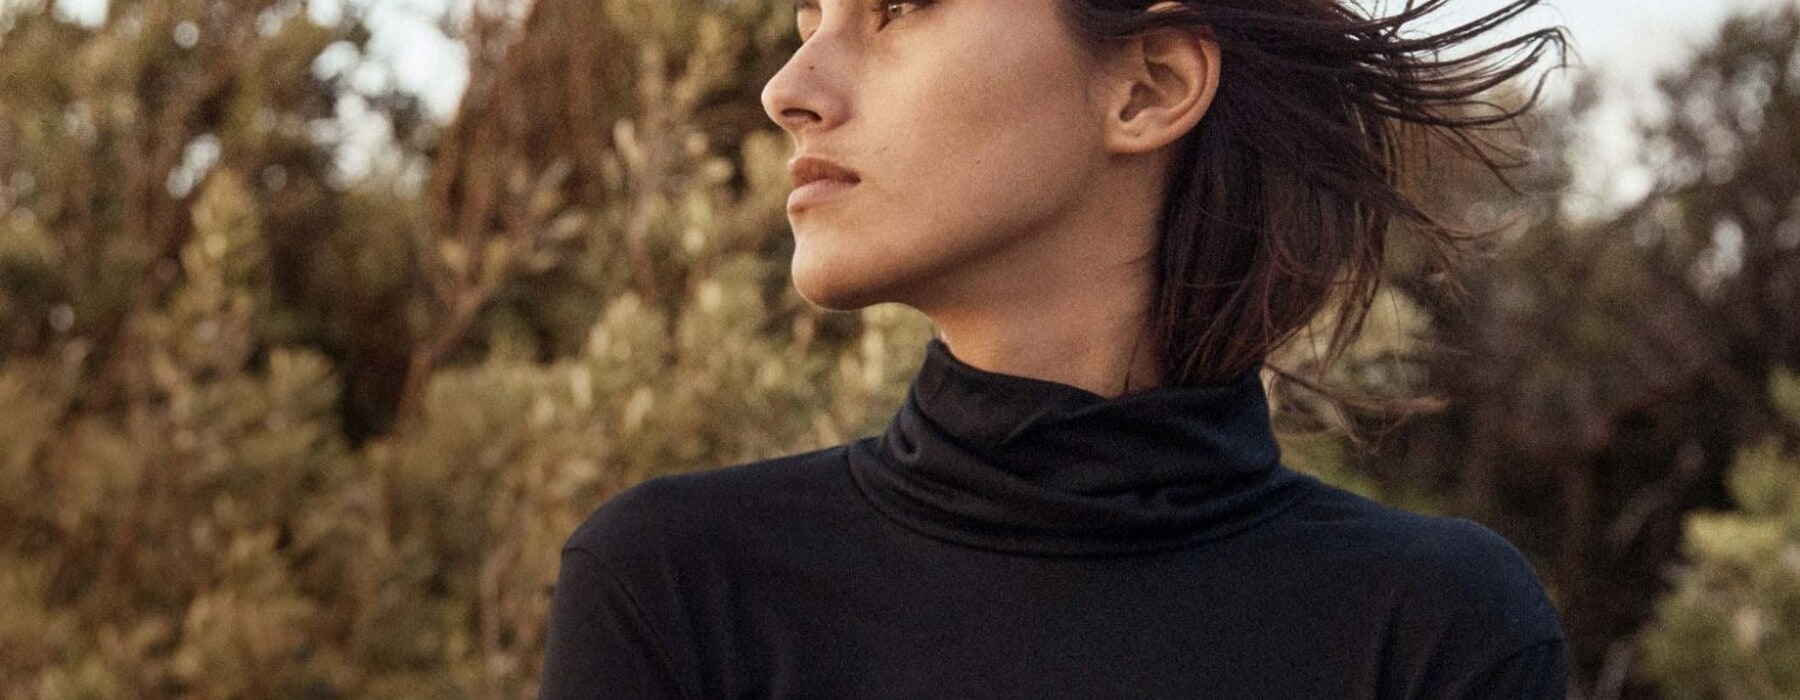 Woman wearing black turtleneck top looking out into the distance